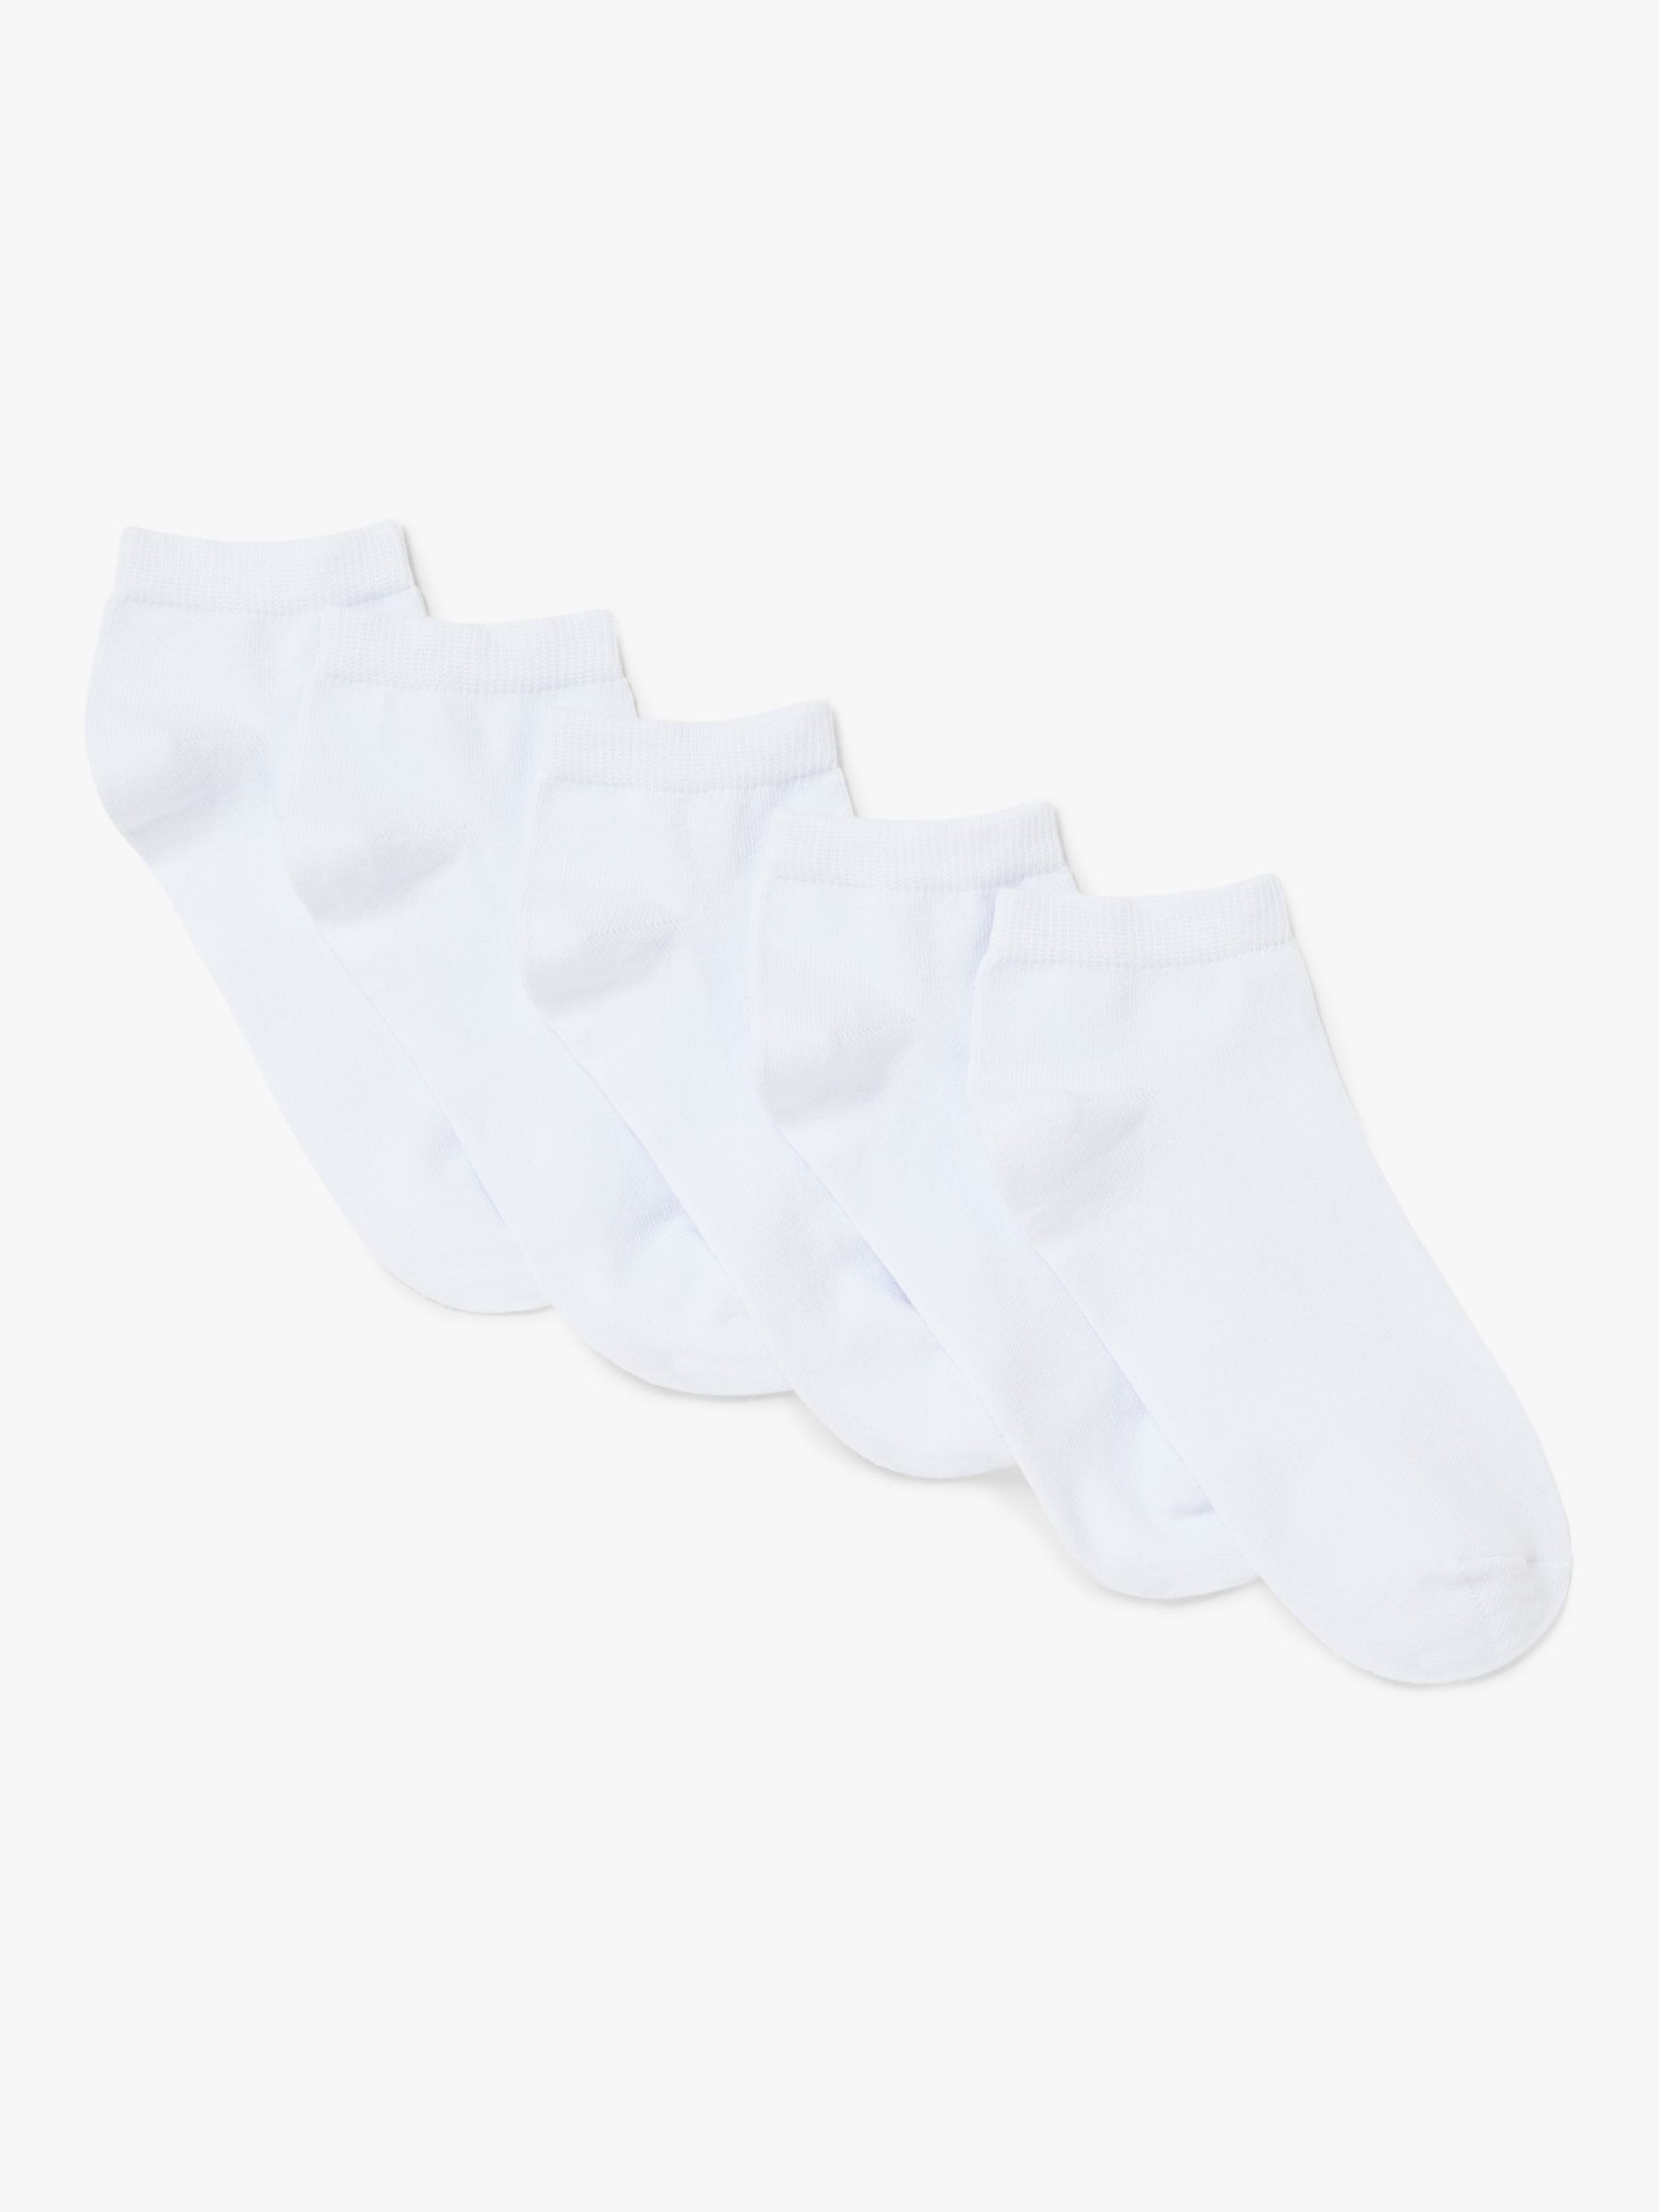 John Lewis ANYDAY Women's Cotton Mix Plain Trainer Socks, Pack of 5 ...